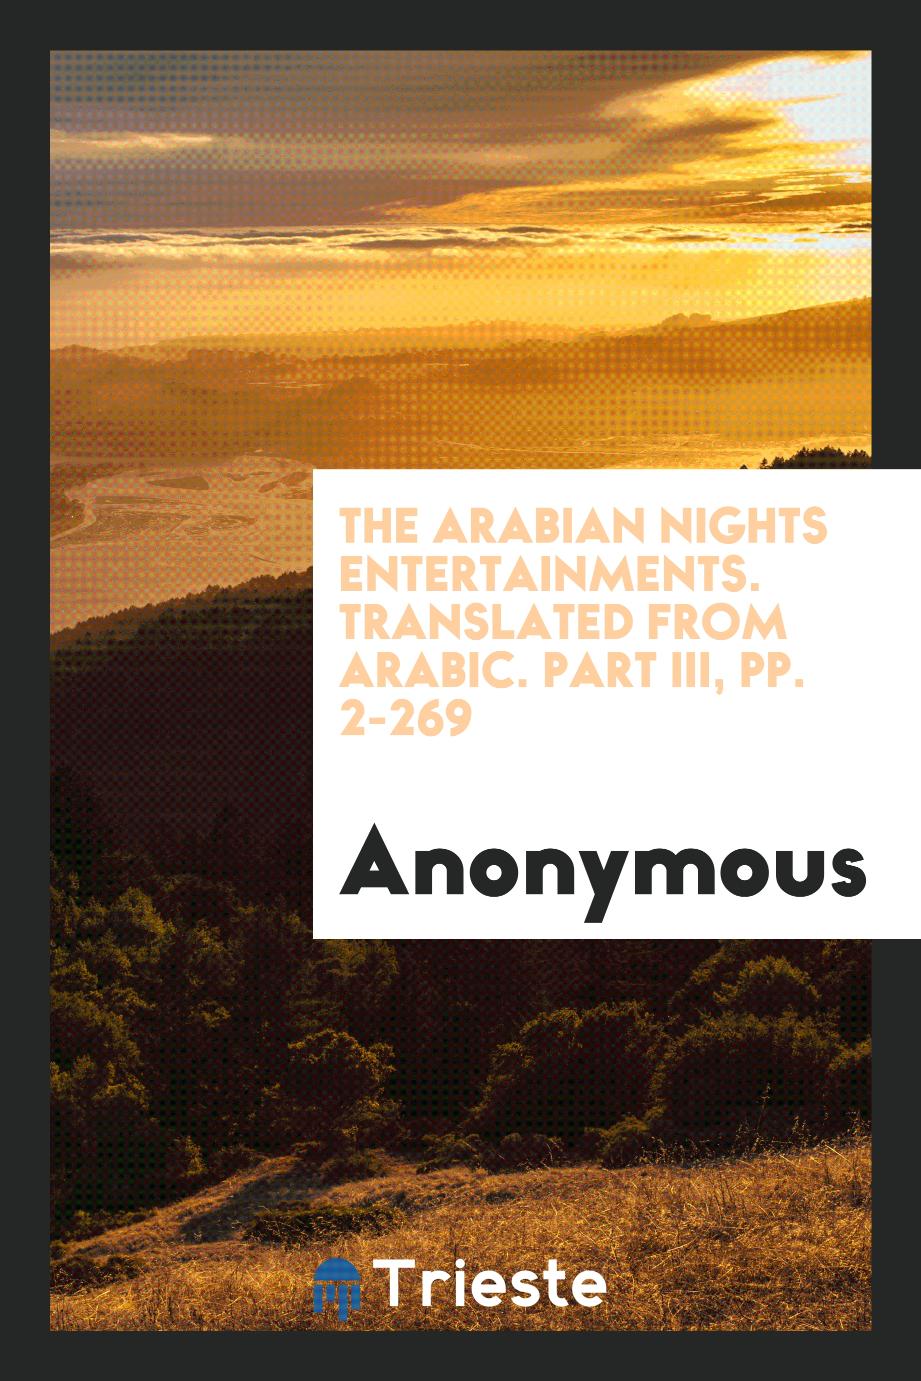 The Arabian Nights Entertainments. Translated from Arabic. Part III, pp. 2-269